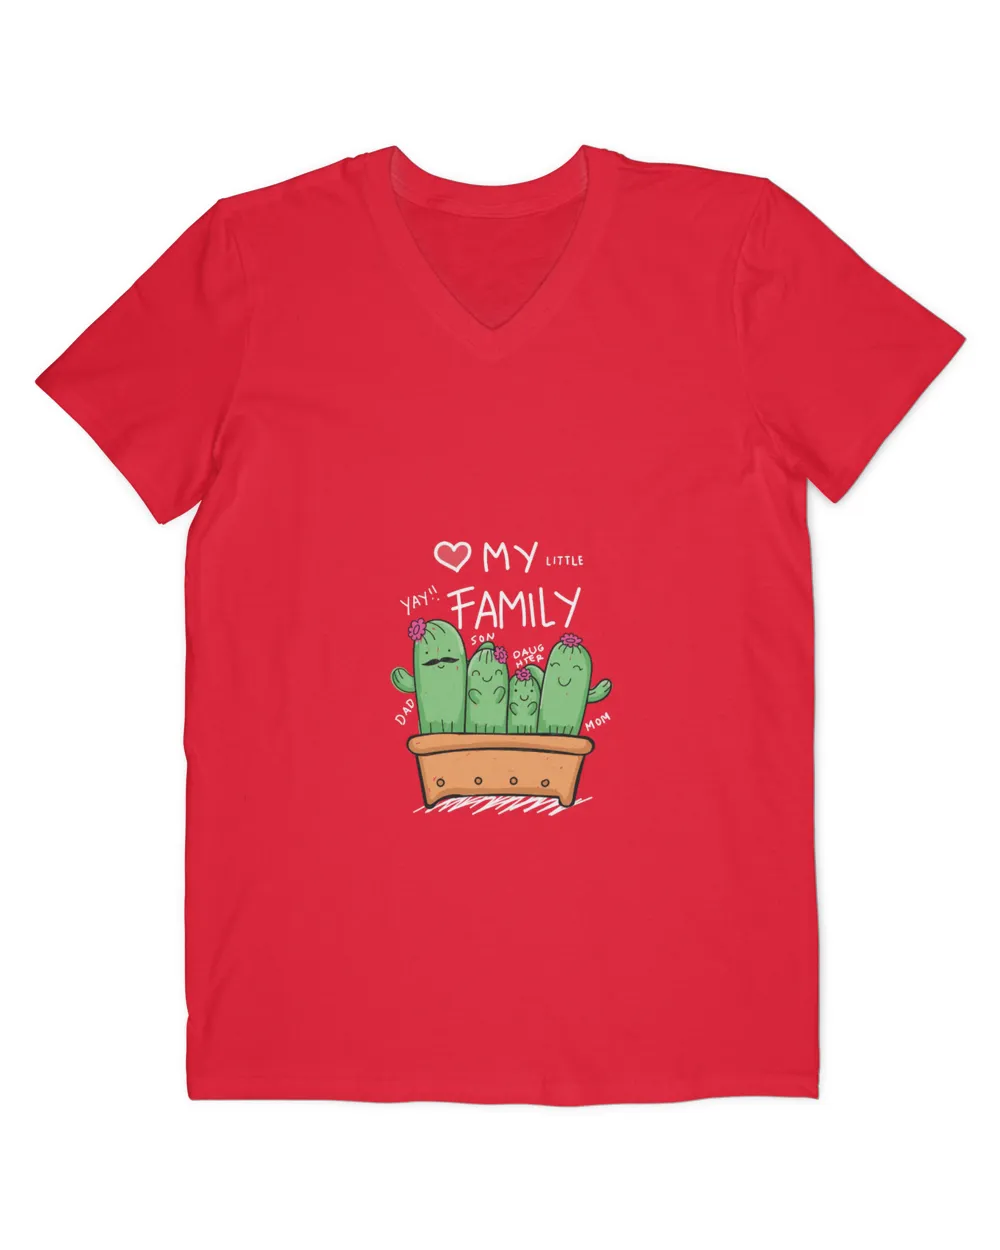 Family T-Shirt, Hoodie, Kids T-Shirt, Toodle & Infant Shirt, Gifts for your Family (44)